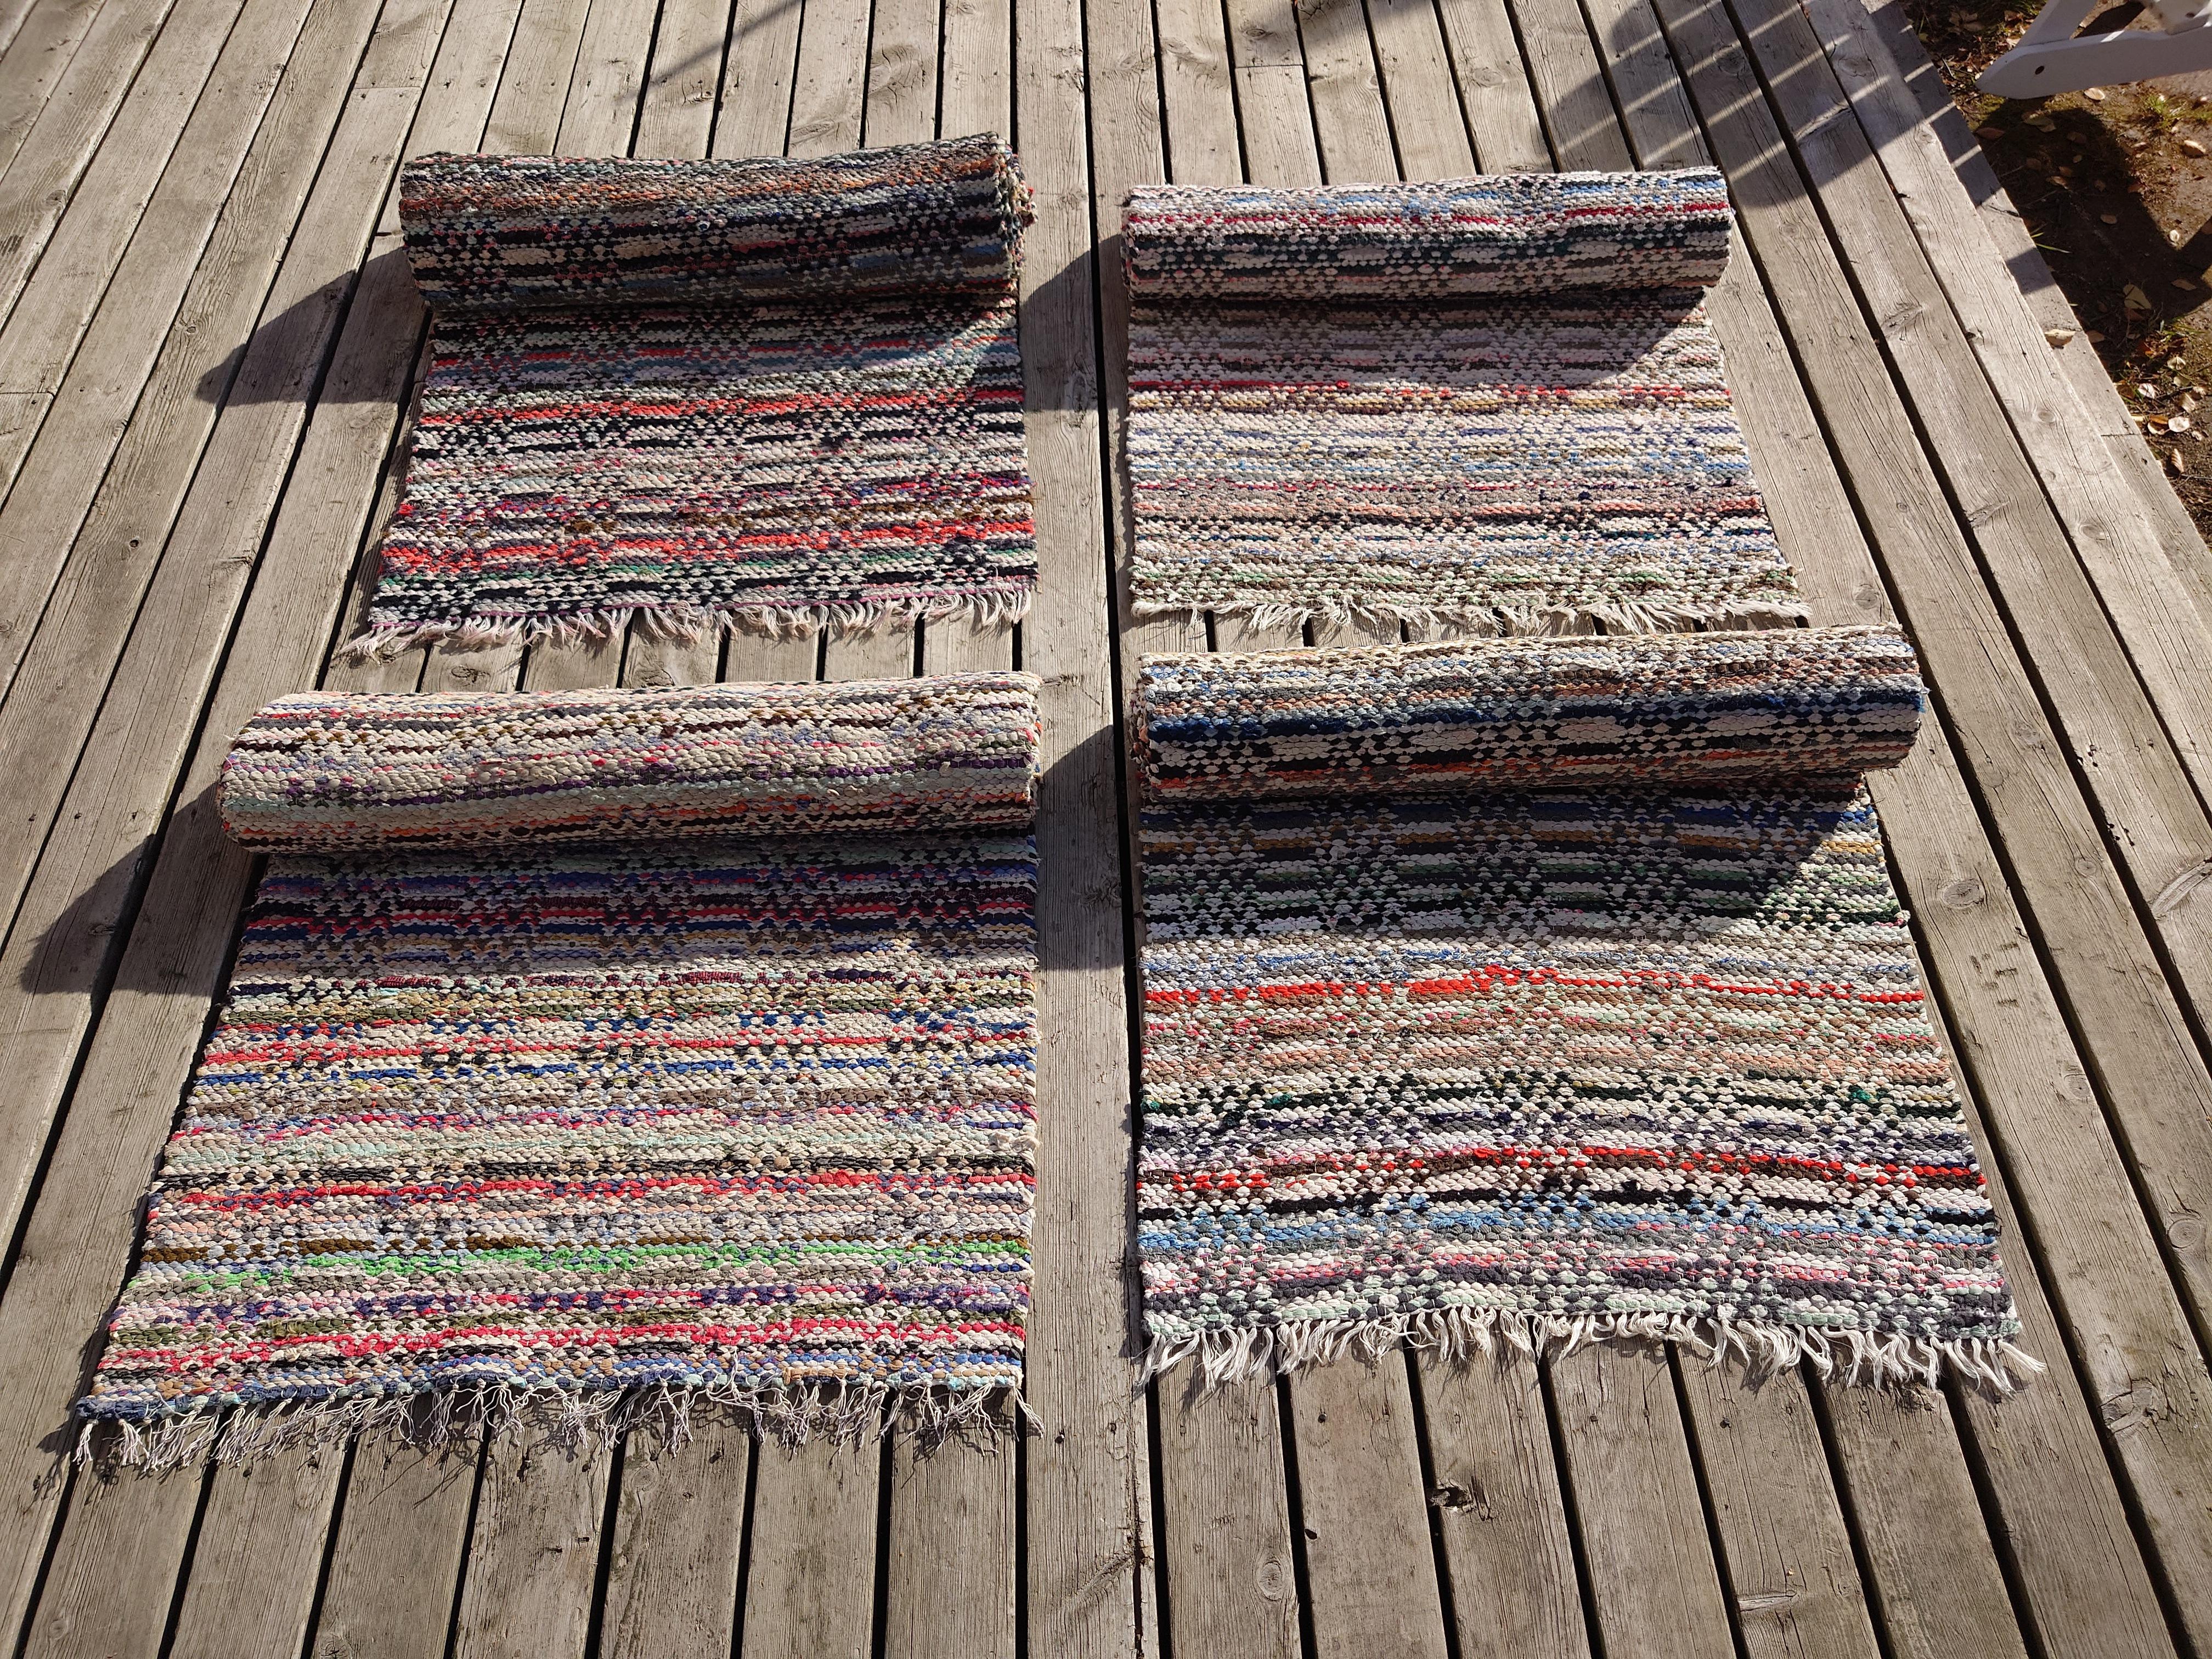 A set of four Rag rugs in similar patterns and colors.
So lovely to place together in a room.
The rugs is handwoven & in a very good condition.

Vintage & antique Swedish rag rugs are from rual Sweden and come in a variety of color shemes and